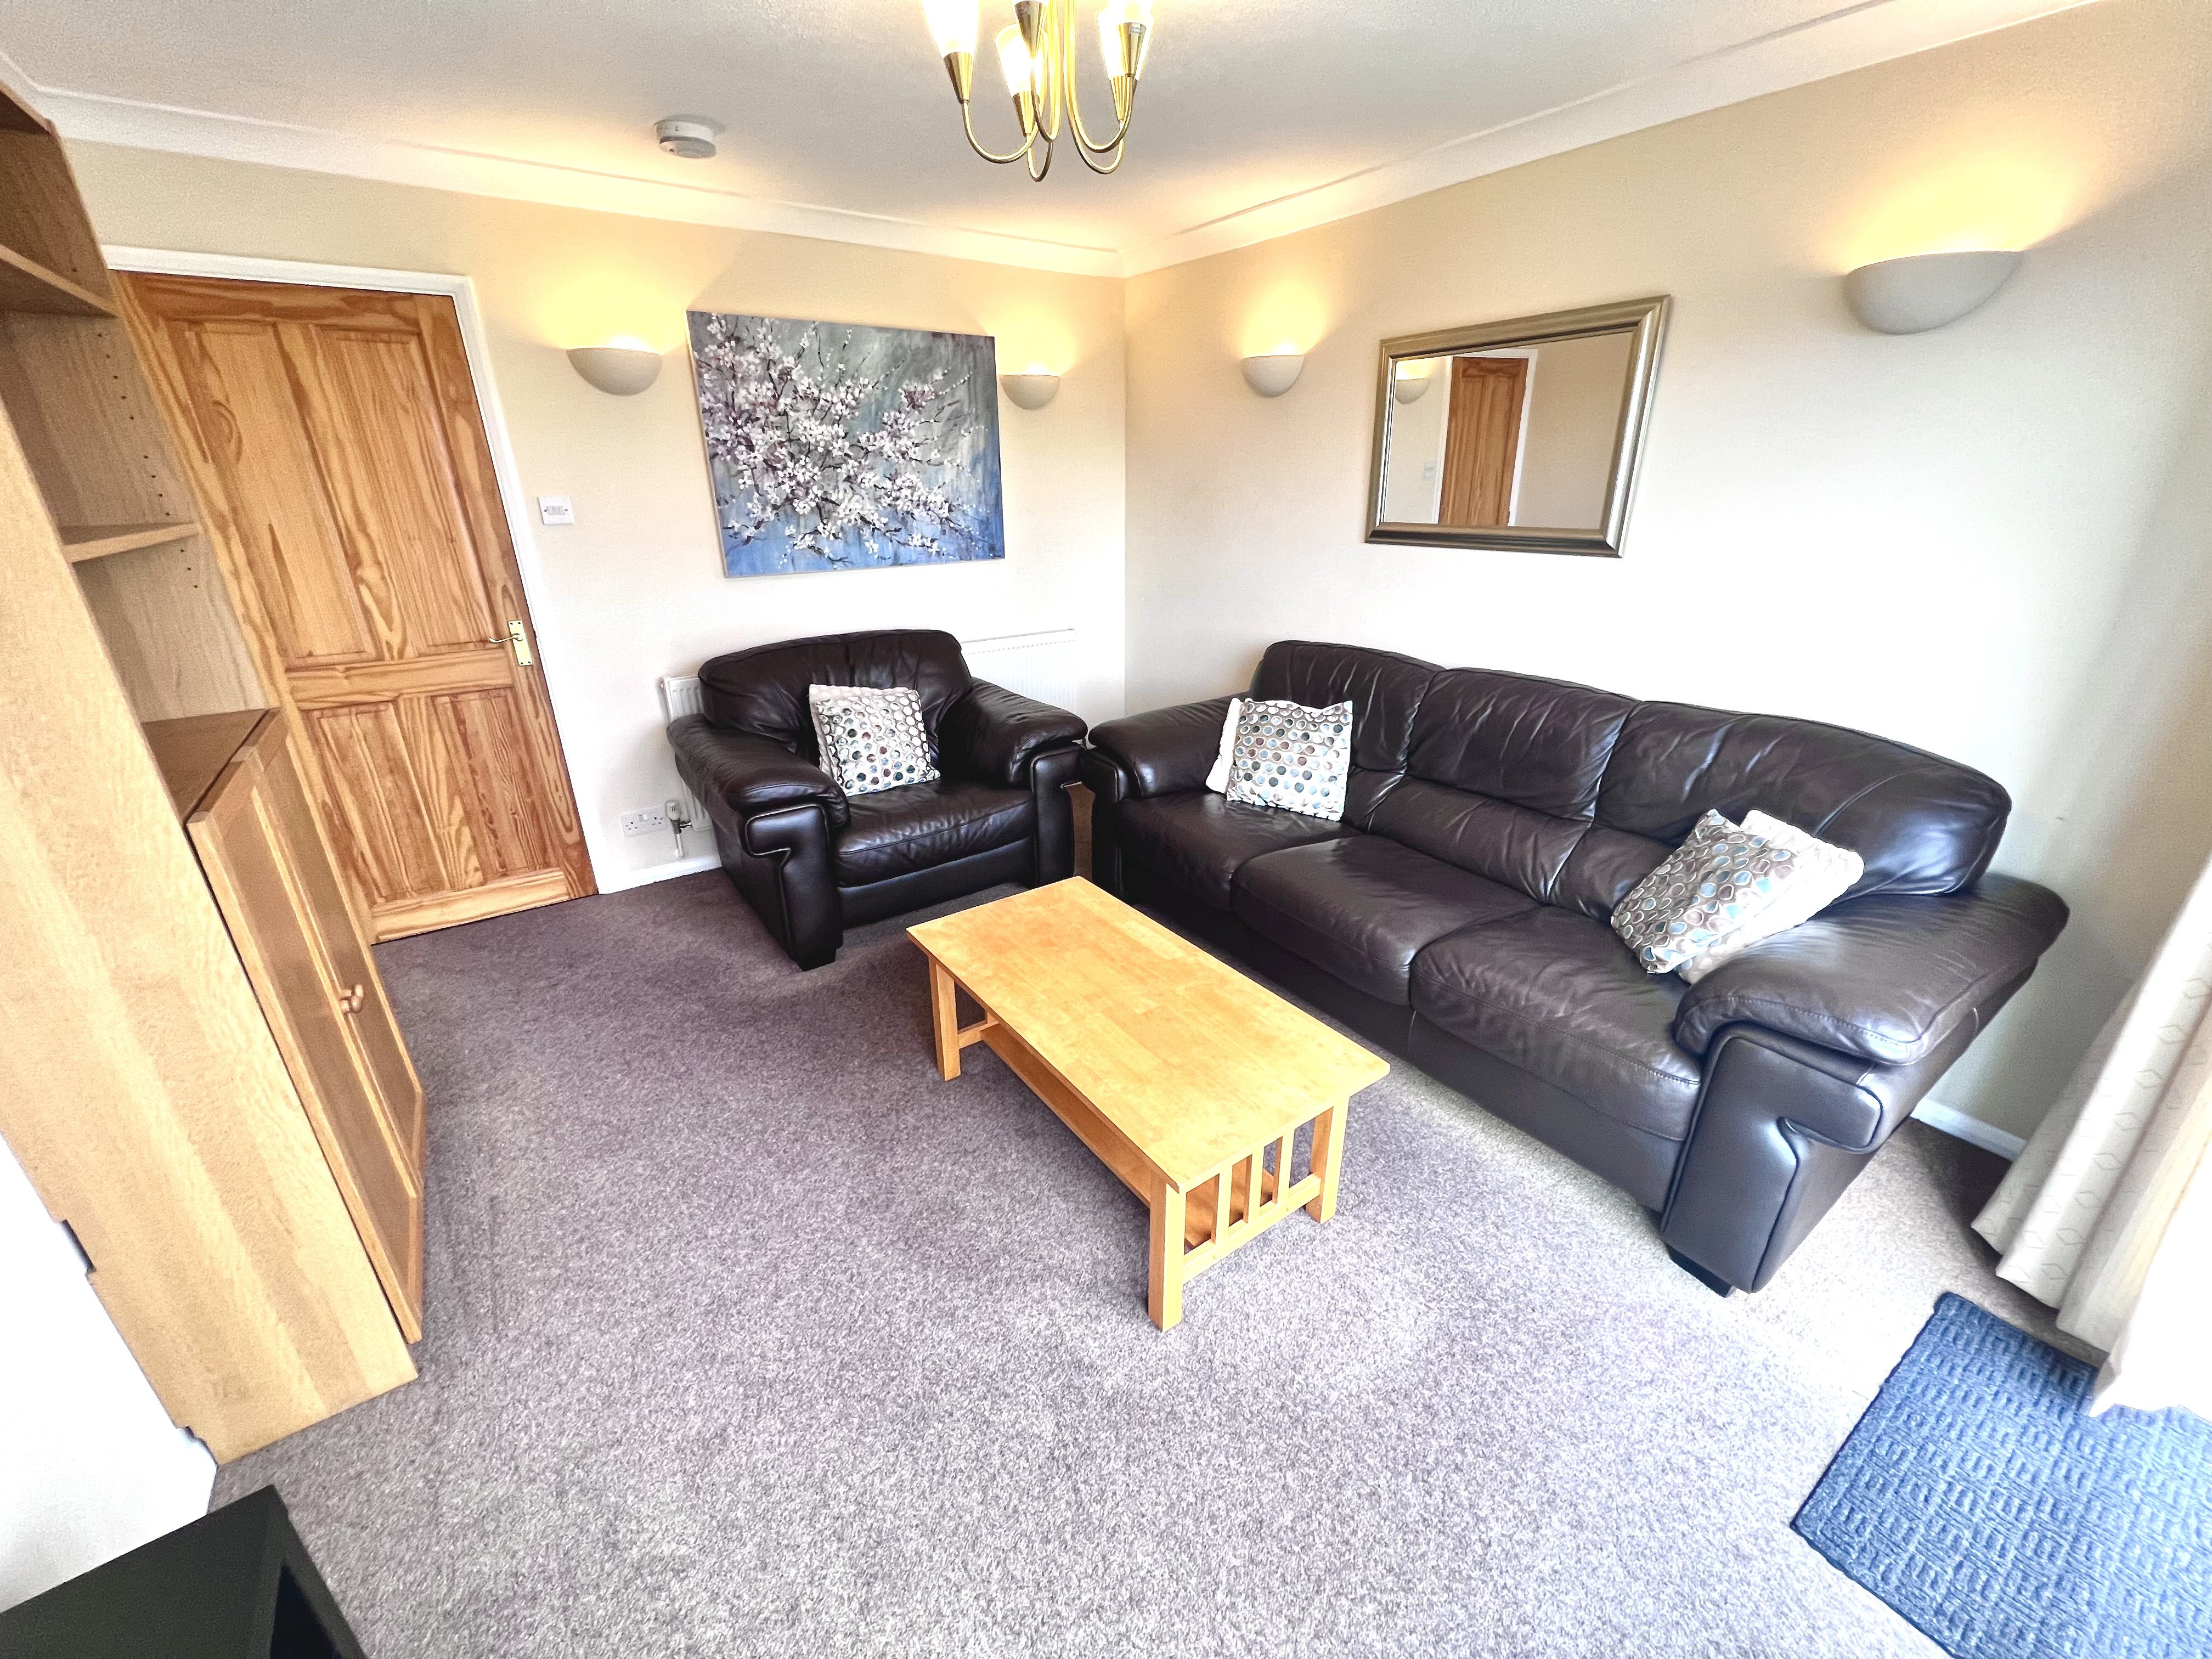 5 bed house to rent in Tippett Close - Property Image 1